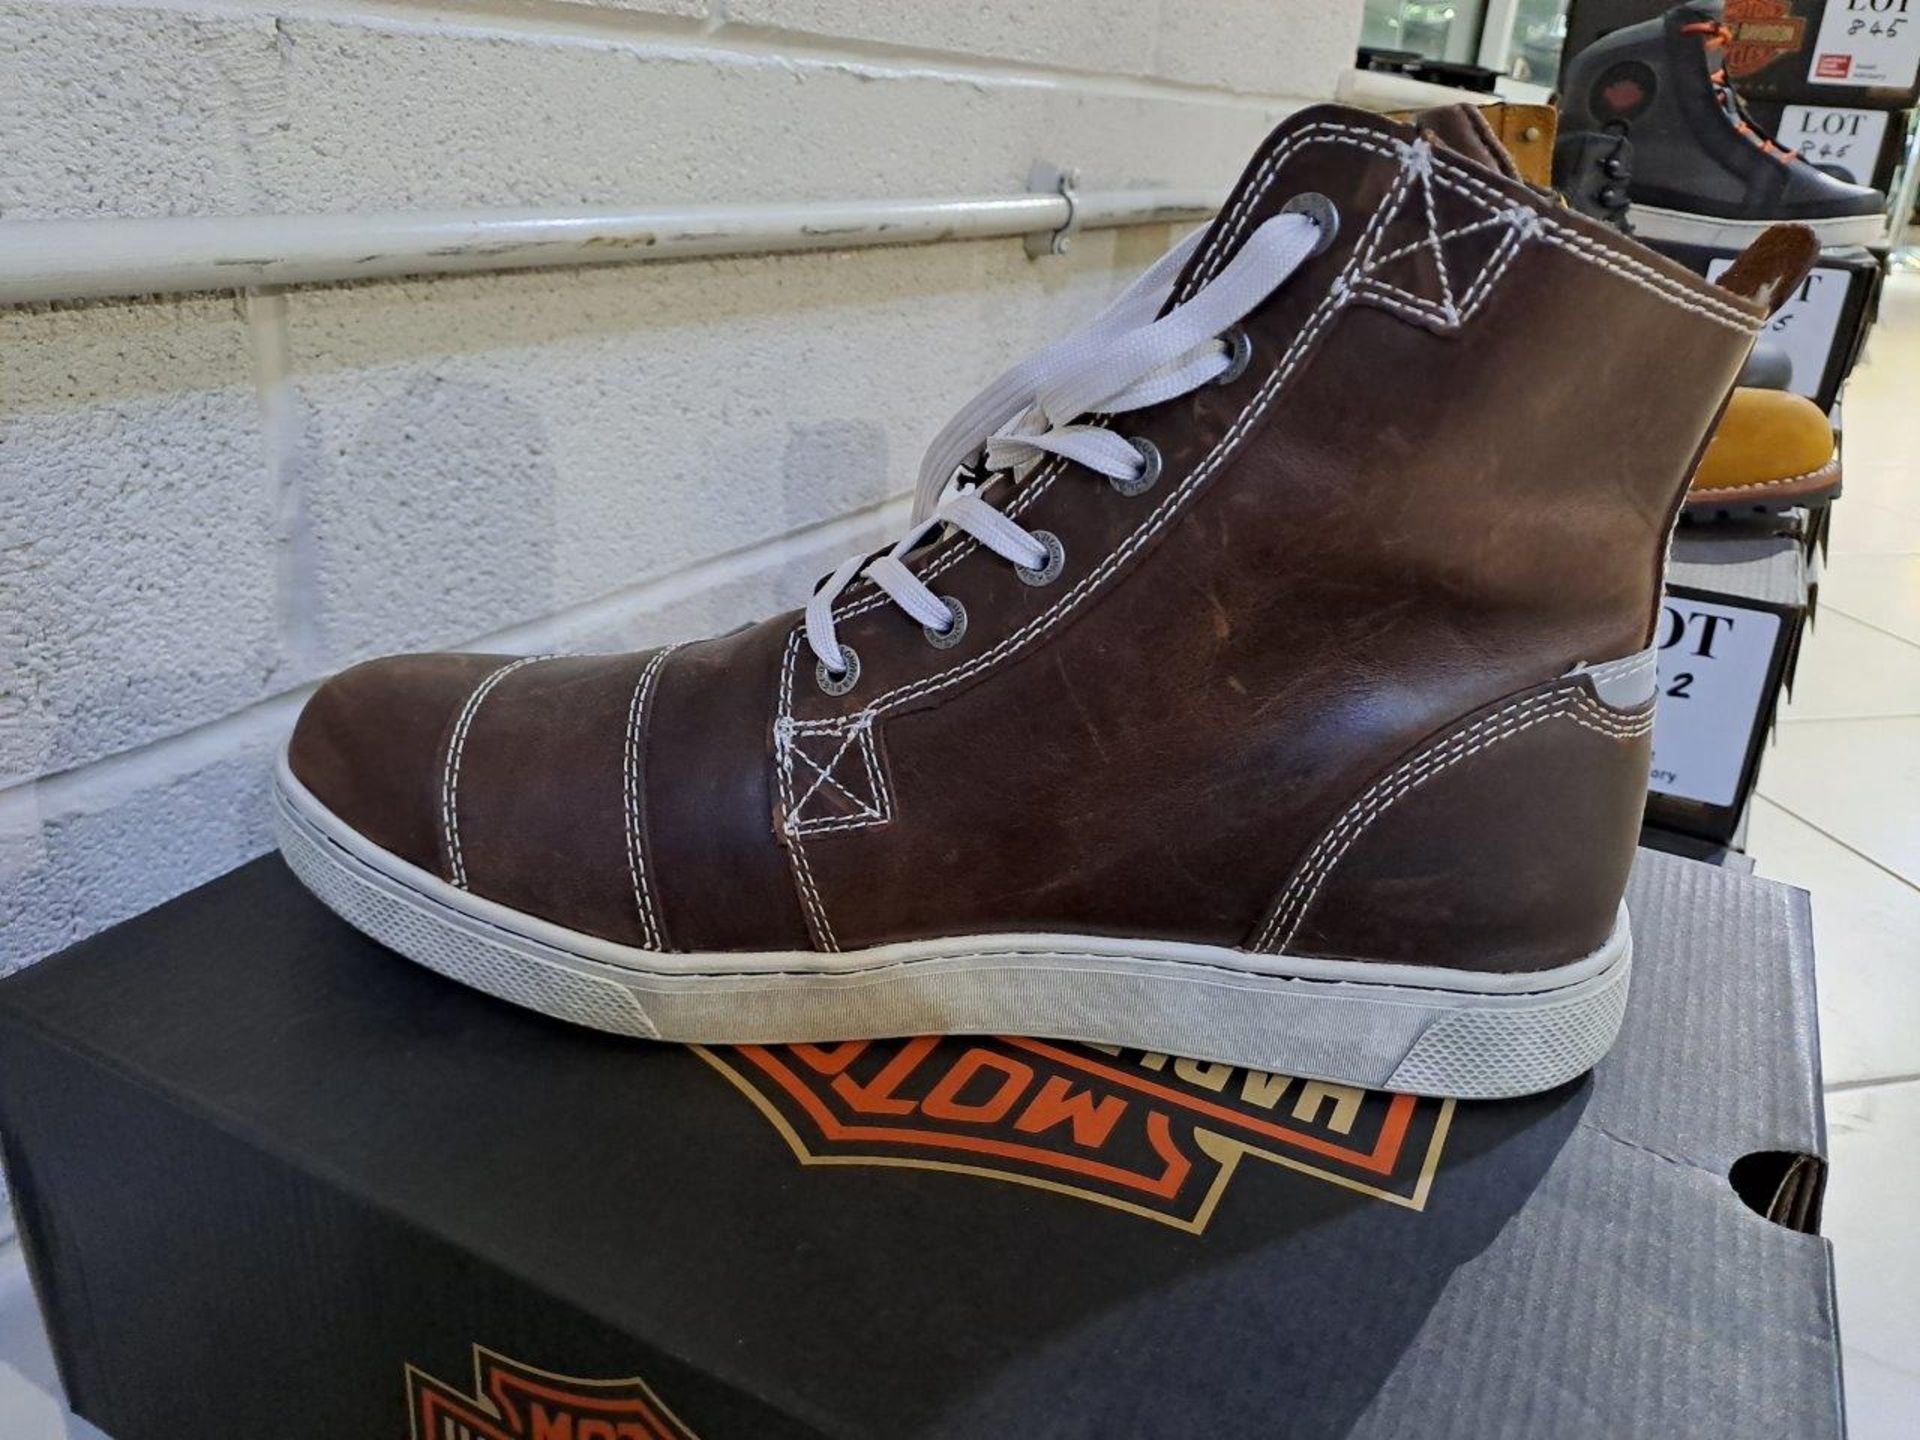 Harley Davidson Steinman Size 11 Mens Boots - Image 3 of 6